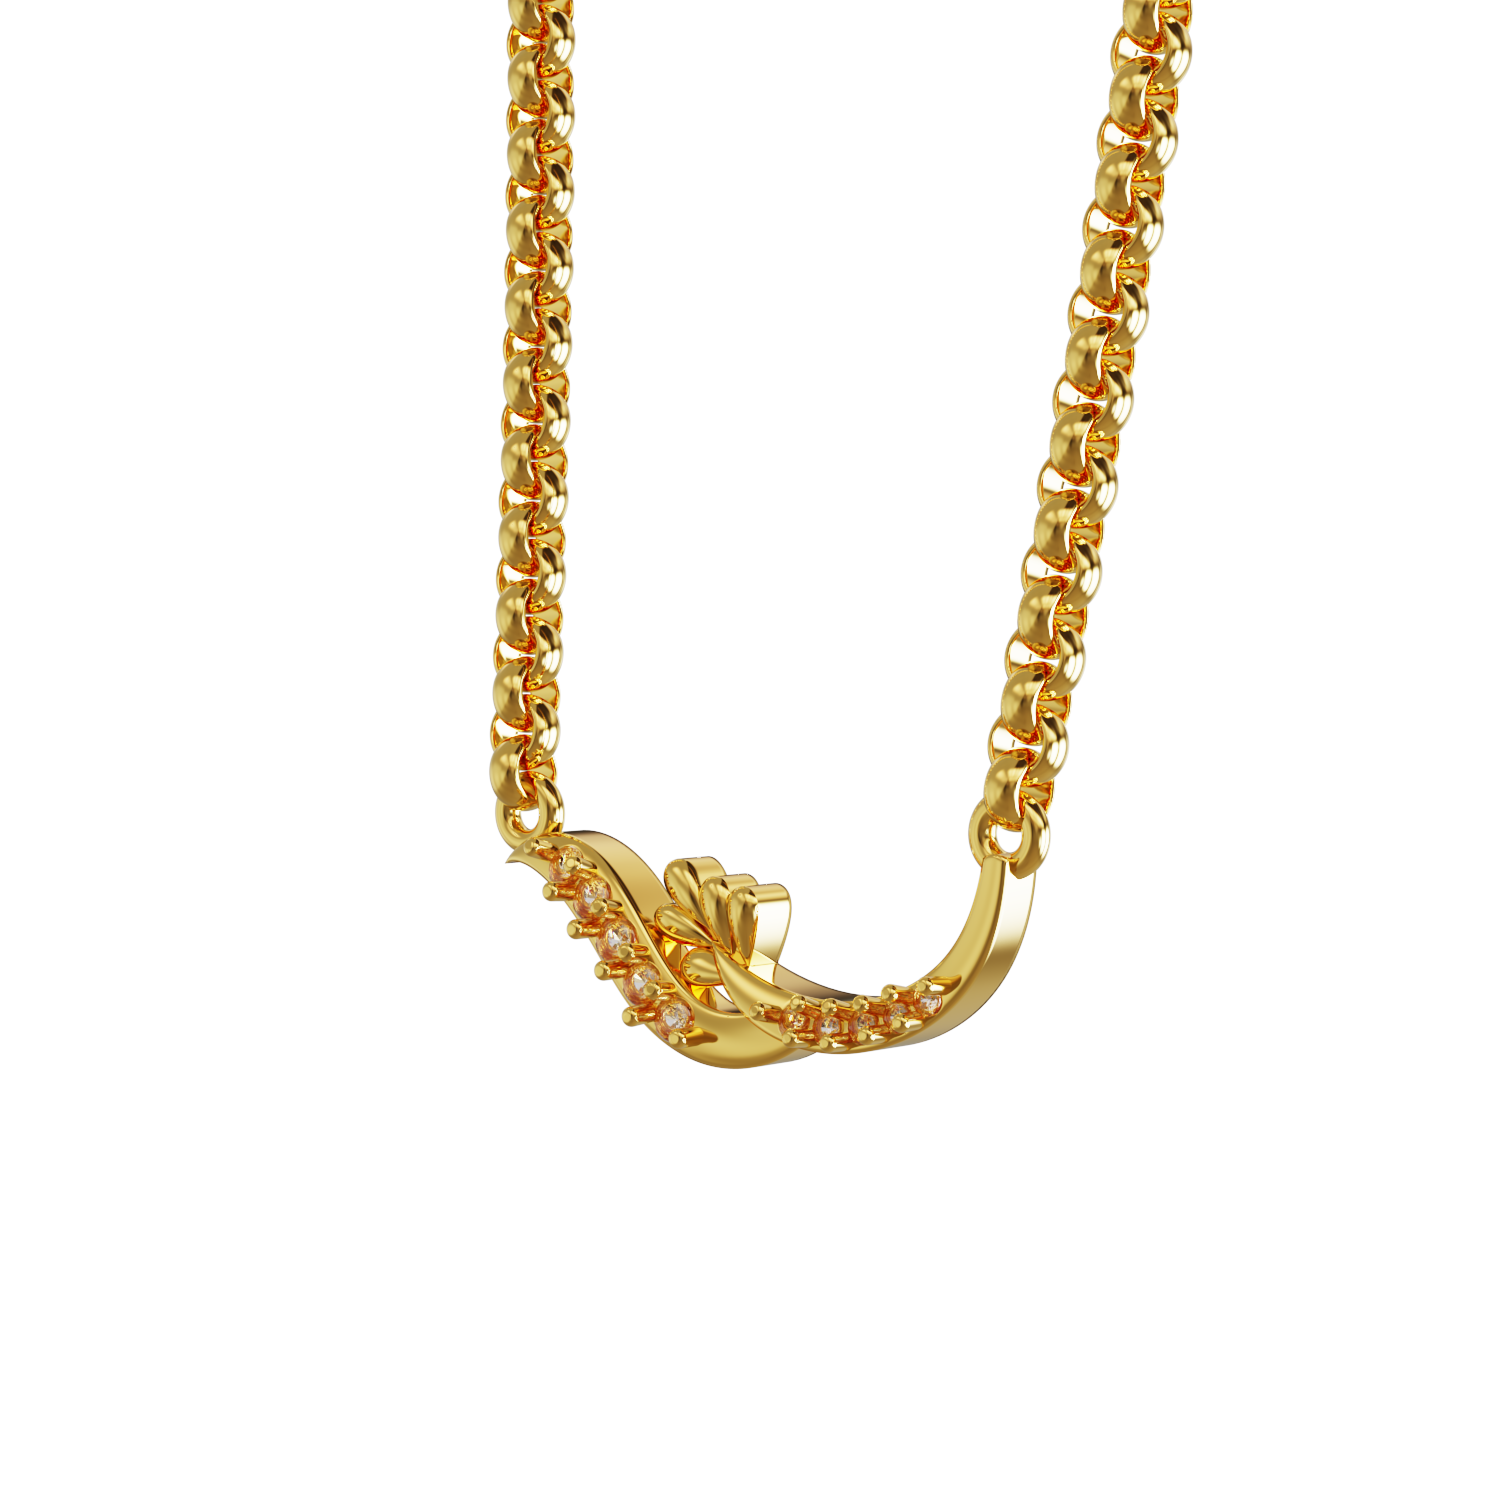 Best-Gold-Pendant-Manufacturing-Company-in-Chennai